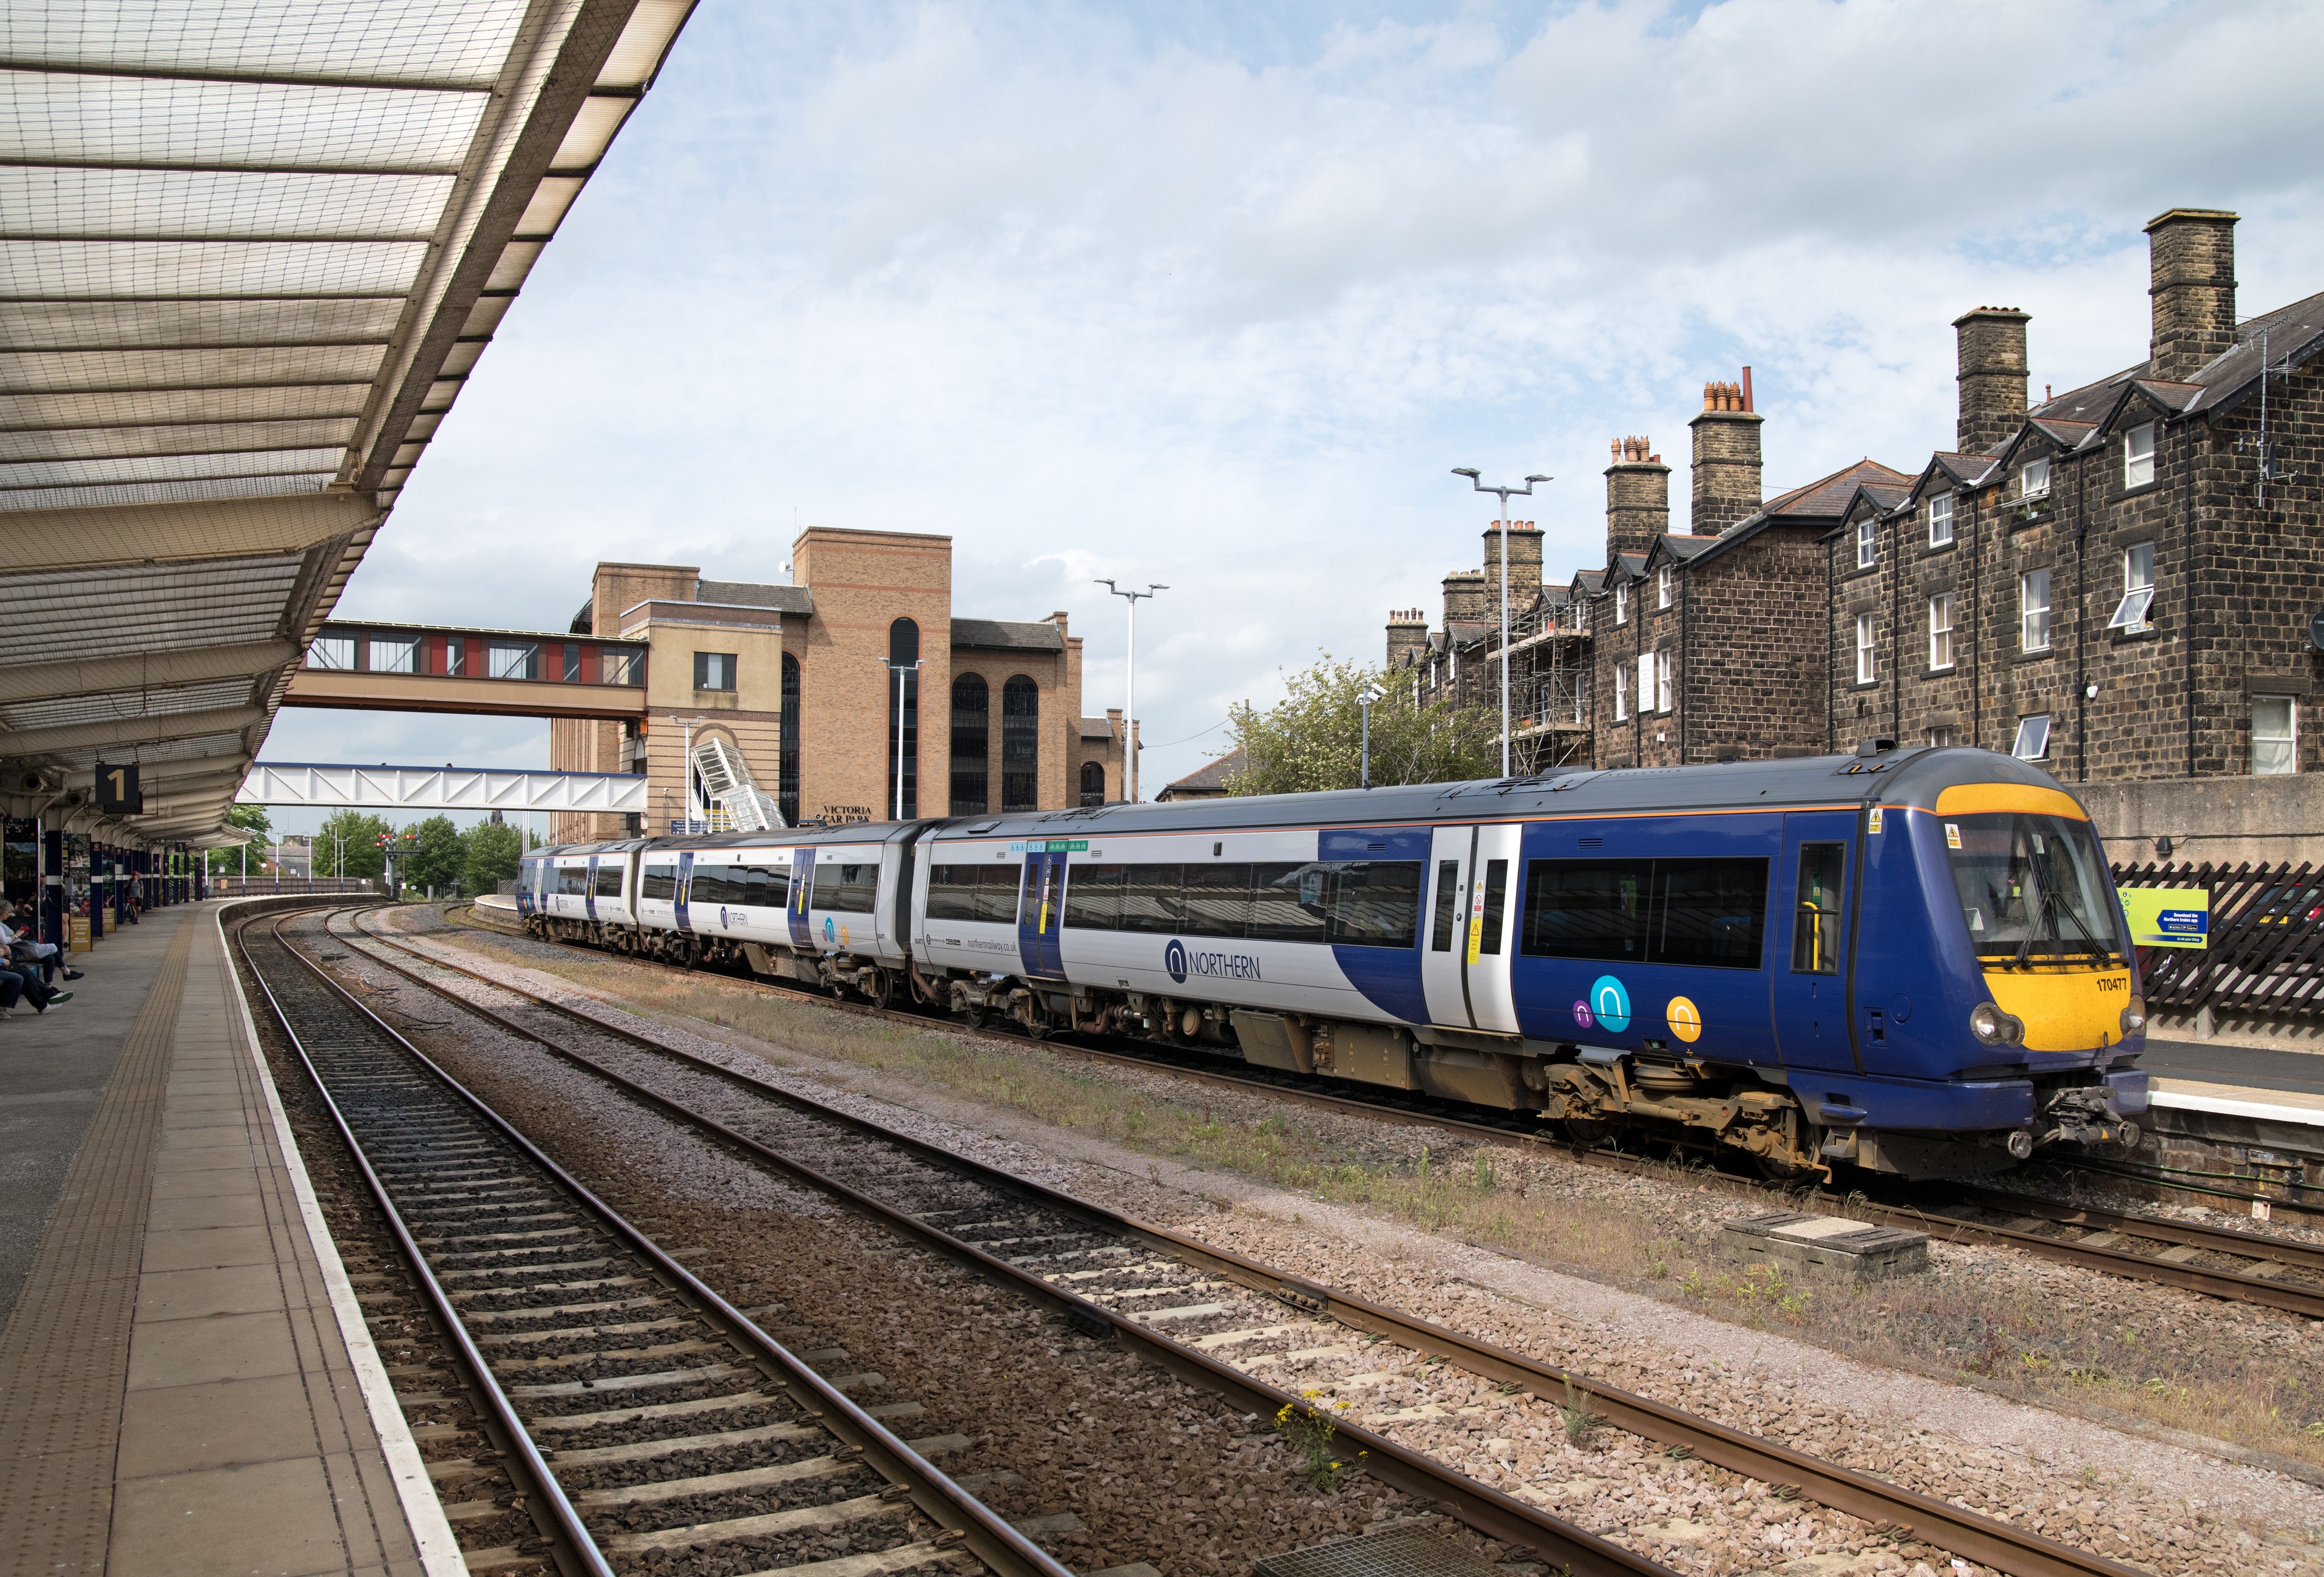 this-image-shows-a-train-standing-at-harrogate-station